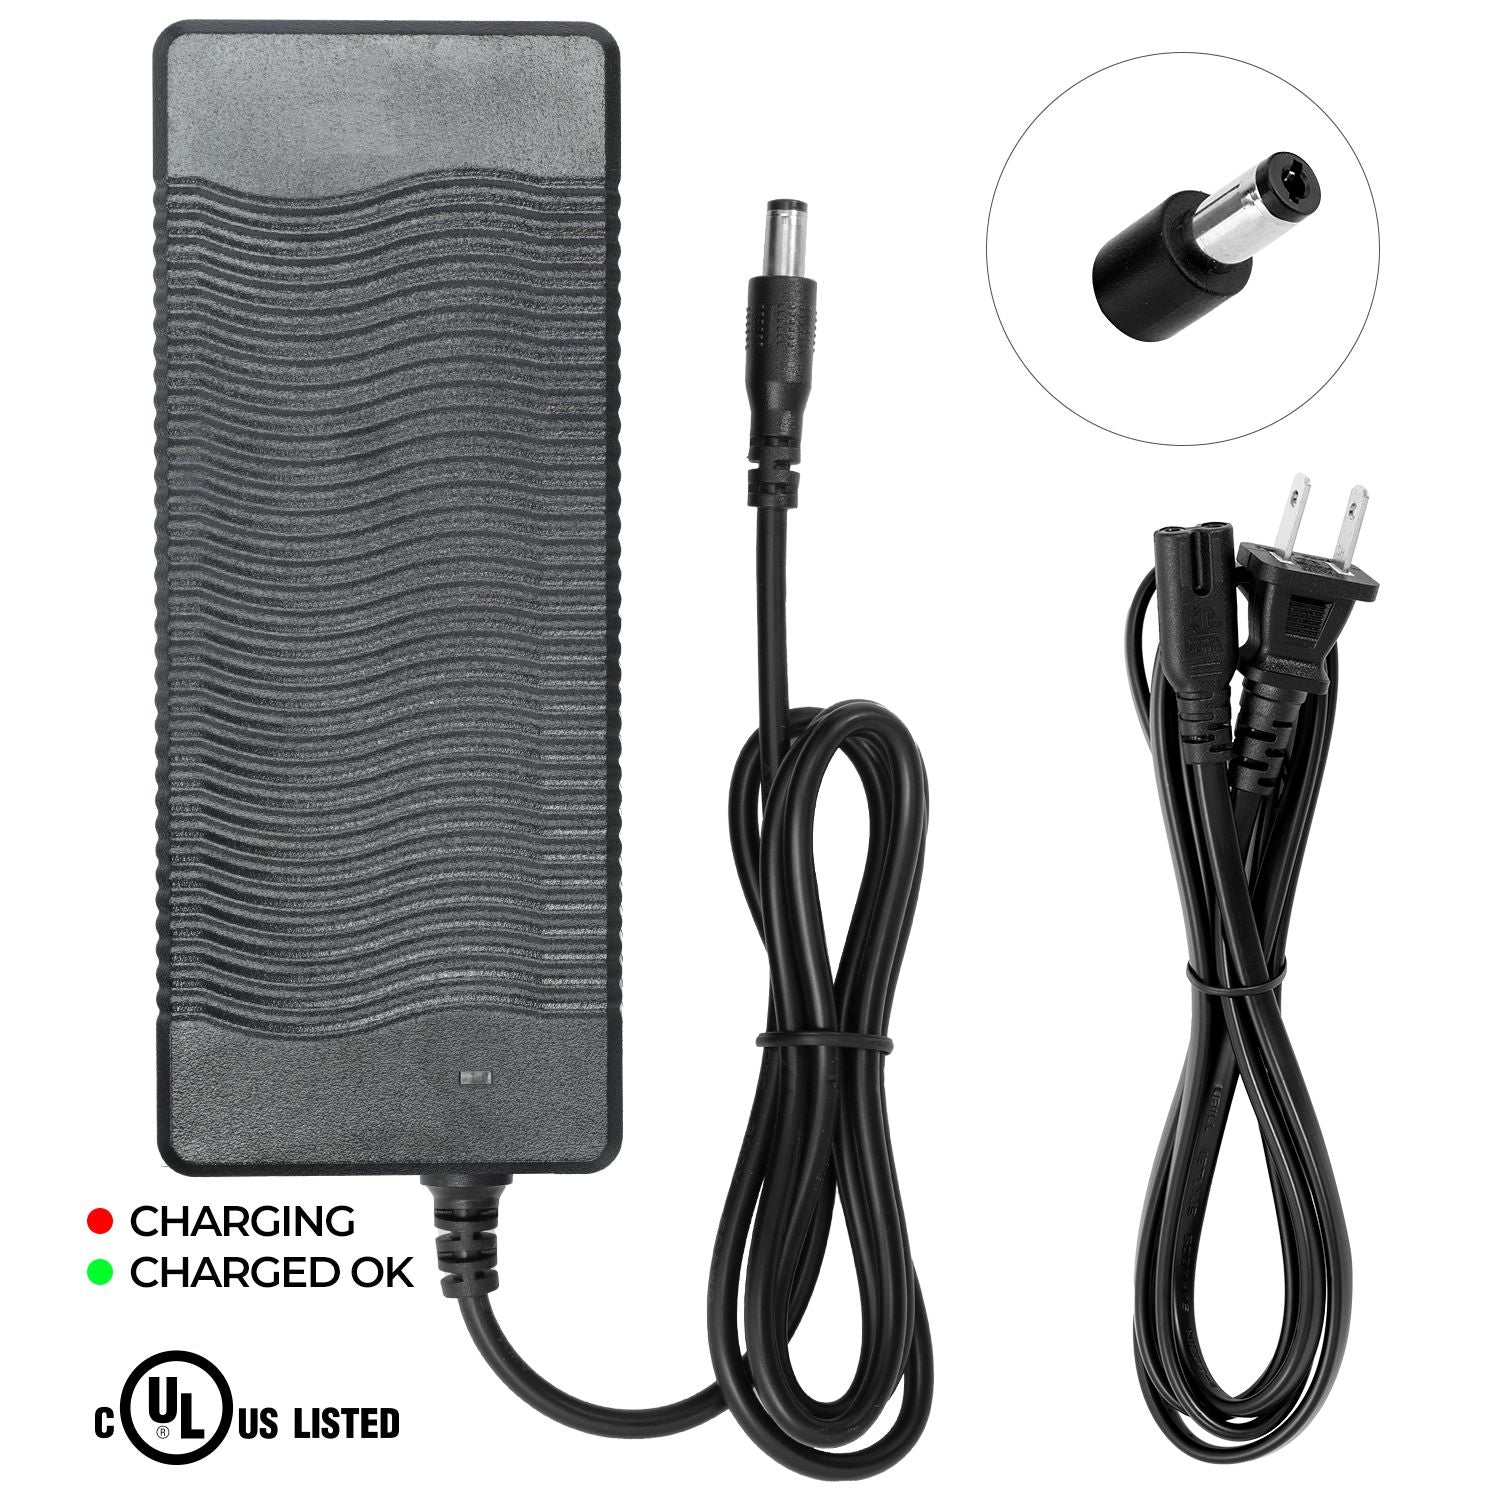 UL Listed Charger for AVENTON SINCH E-Bike (If your AVENTON model is something else, do NOT order it)